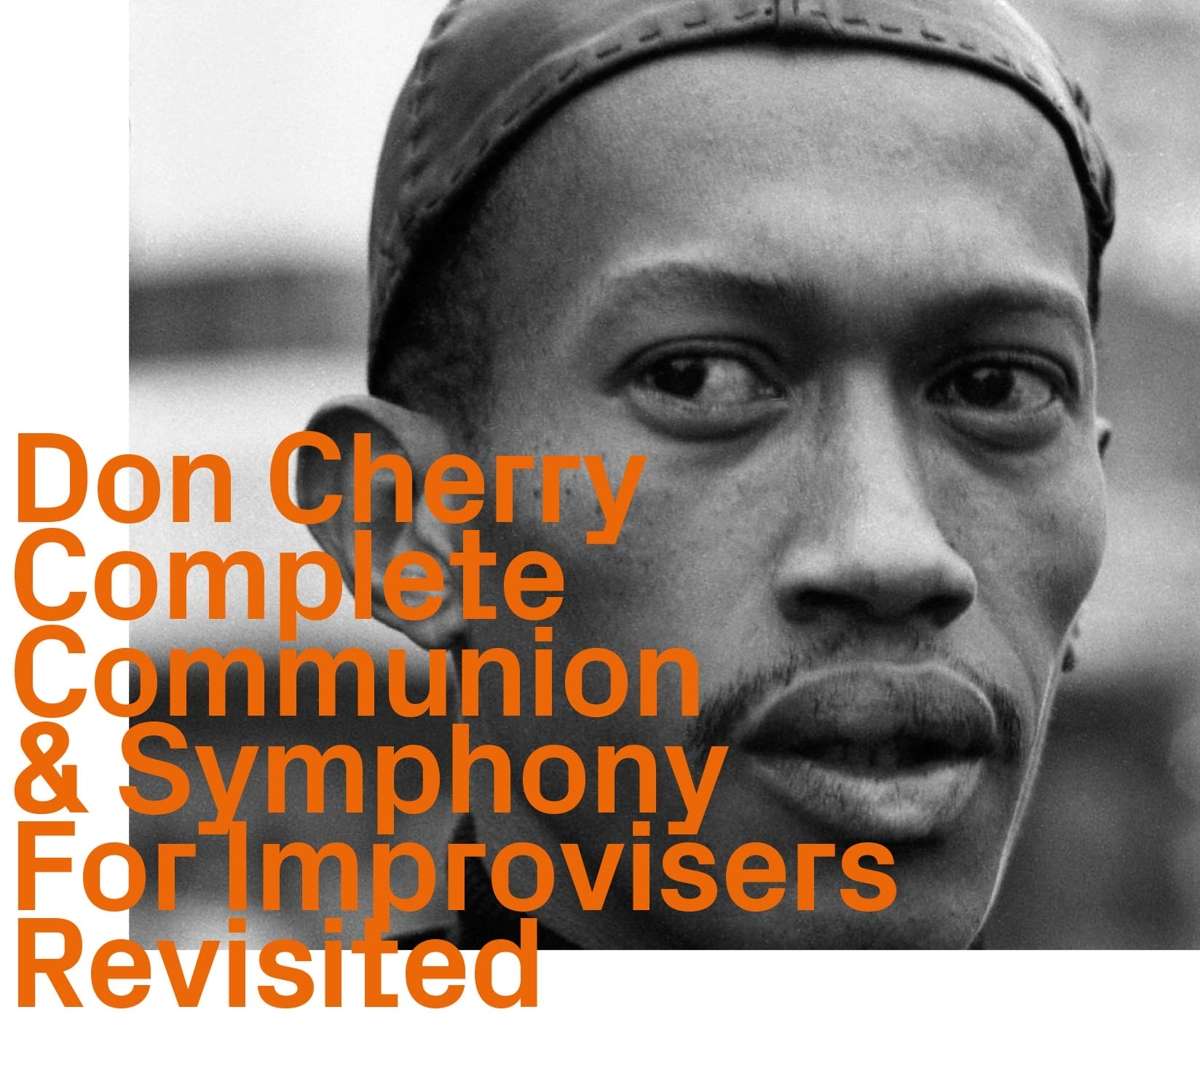 Don Cherry: Complete Communion & Symphony For Improvisers (Revisited)